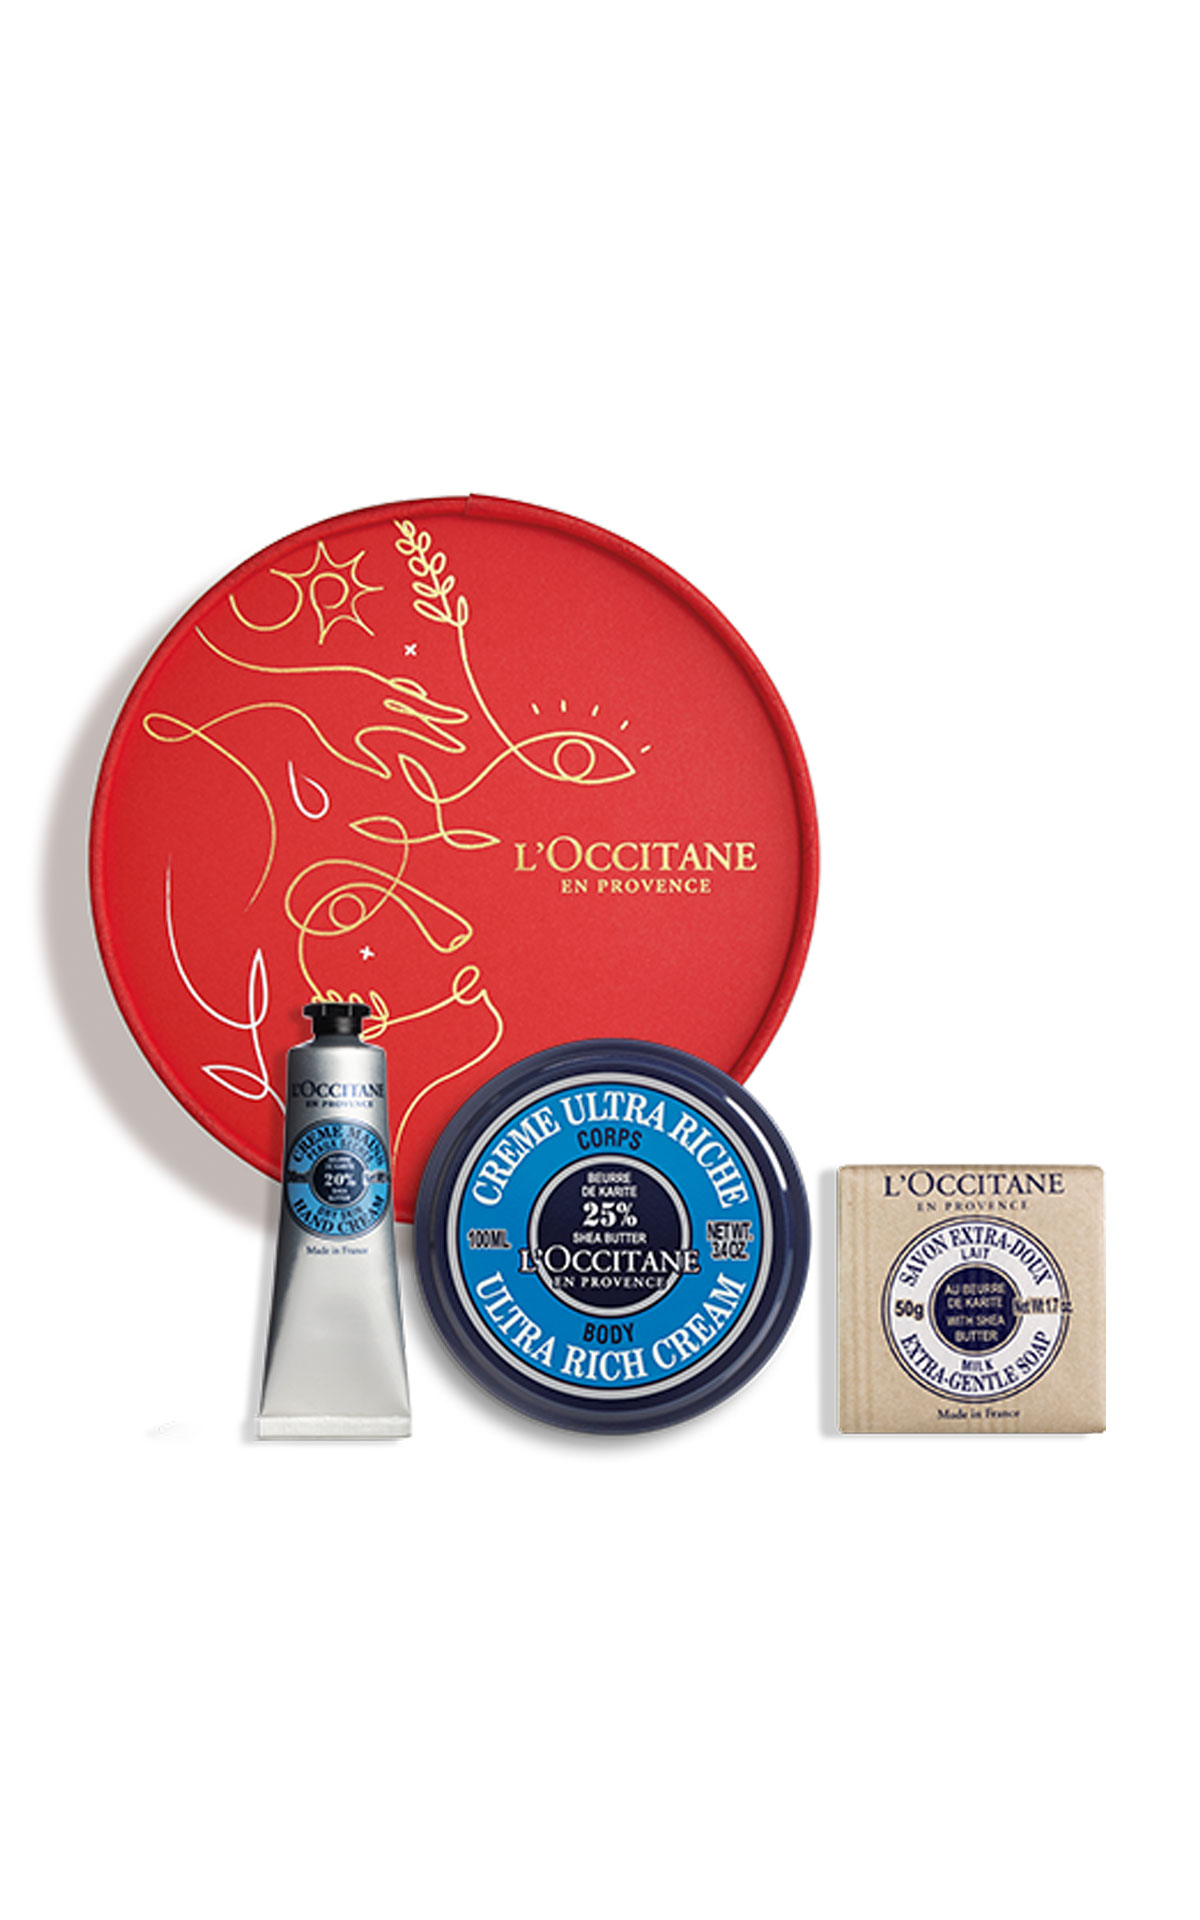 L'Occitane Best of shea butter collection from Bicester Village